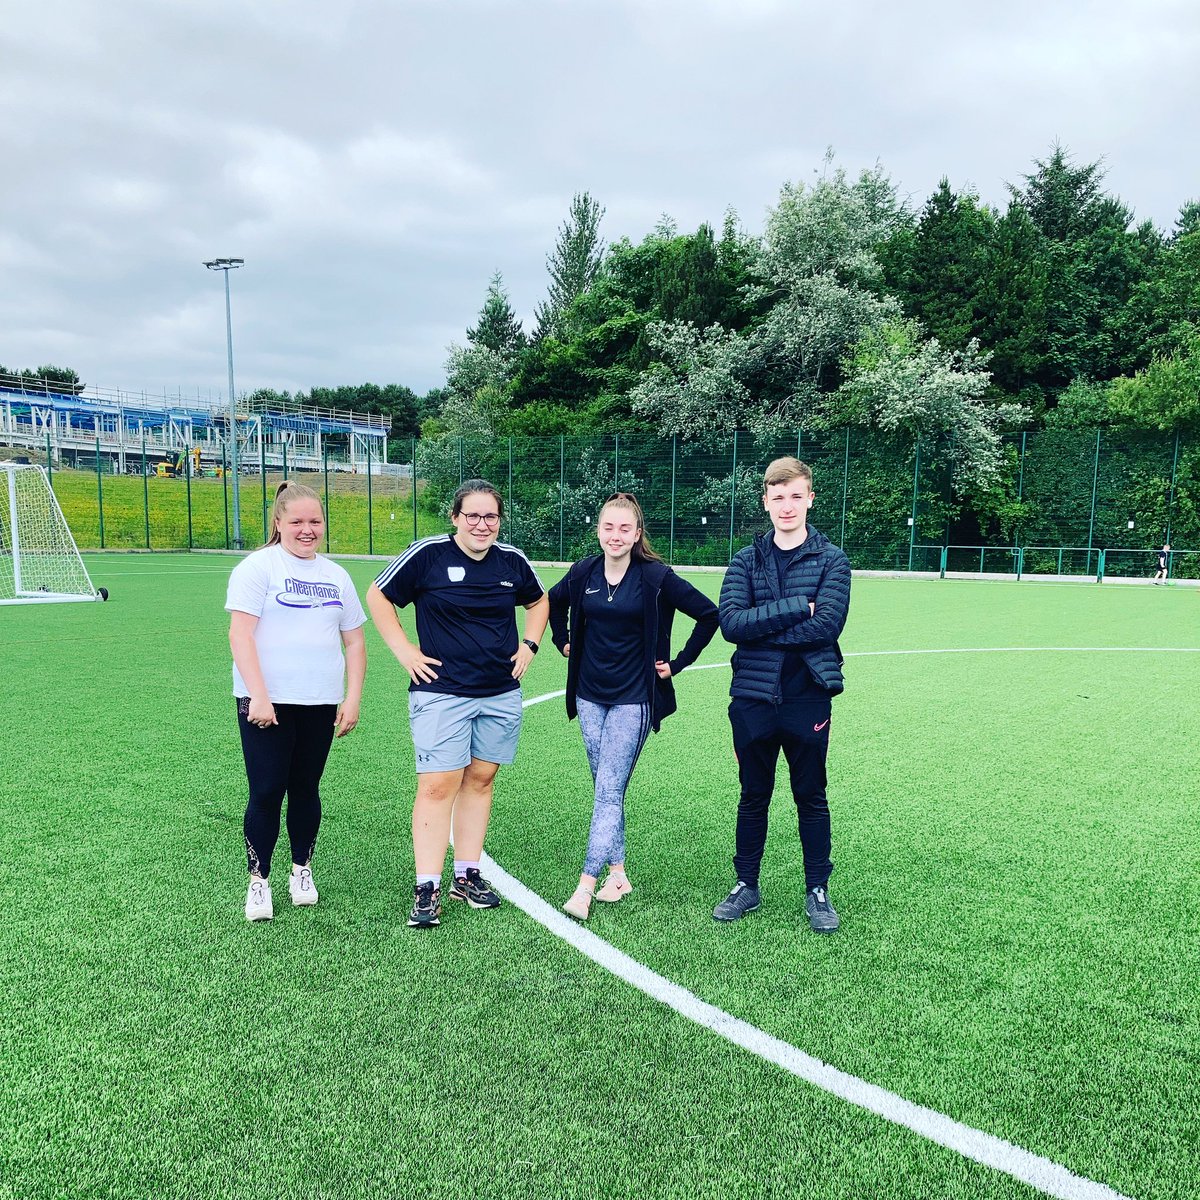 Get into Summer ☀️🙌🏼 @ActiveWL @sportscotland 

Fantastic group of volunteers @JamesYoungHS Active Fun, Active Feet holiday programme ⚽️🏀🎾

#friendshipinsport #rolemodels #youngambassadors #coachacademy